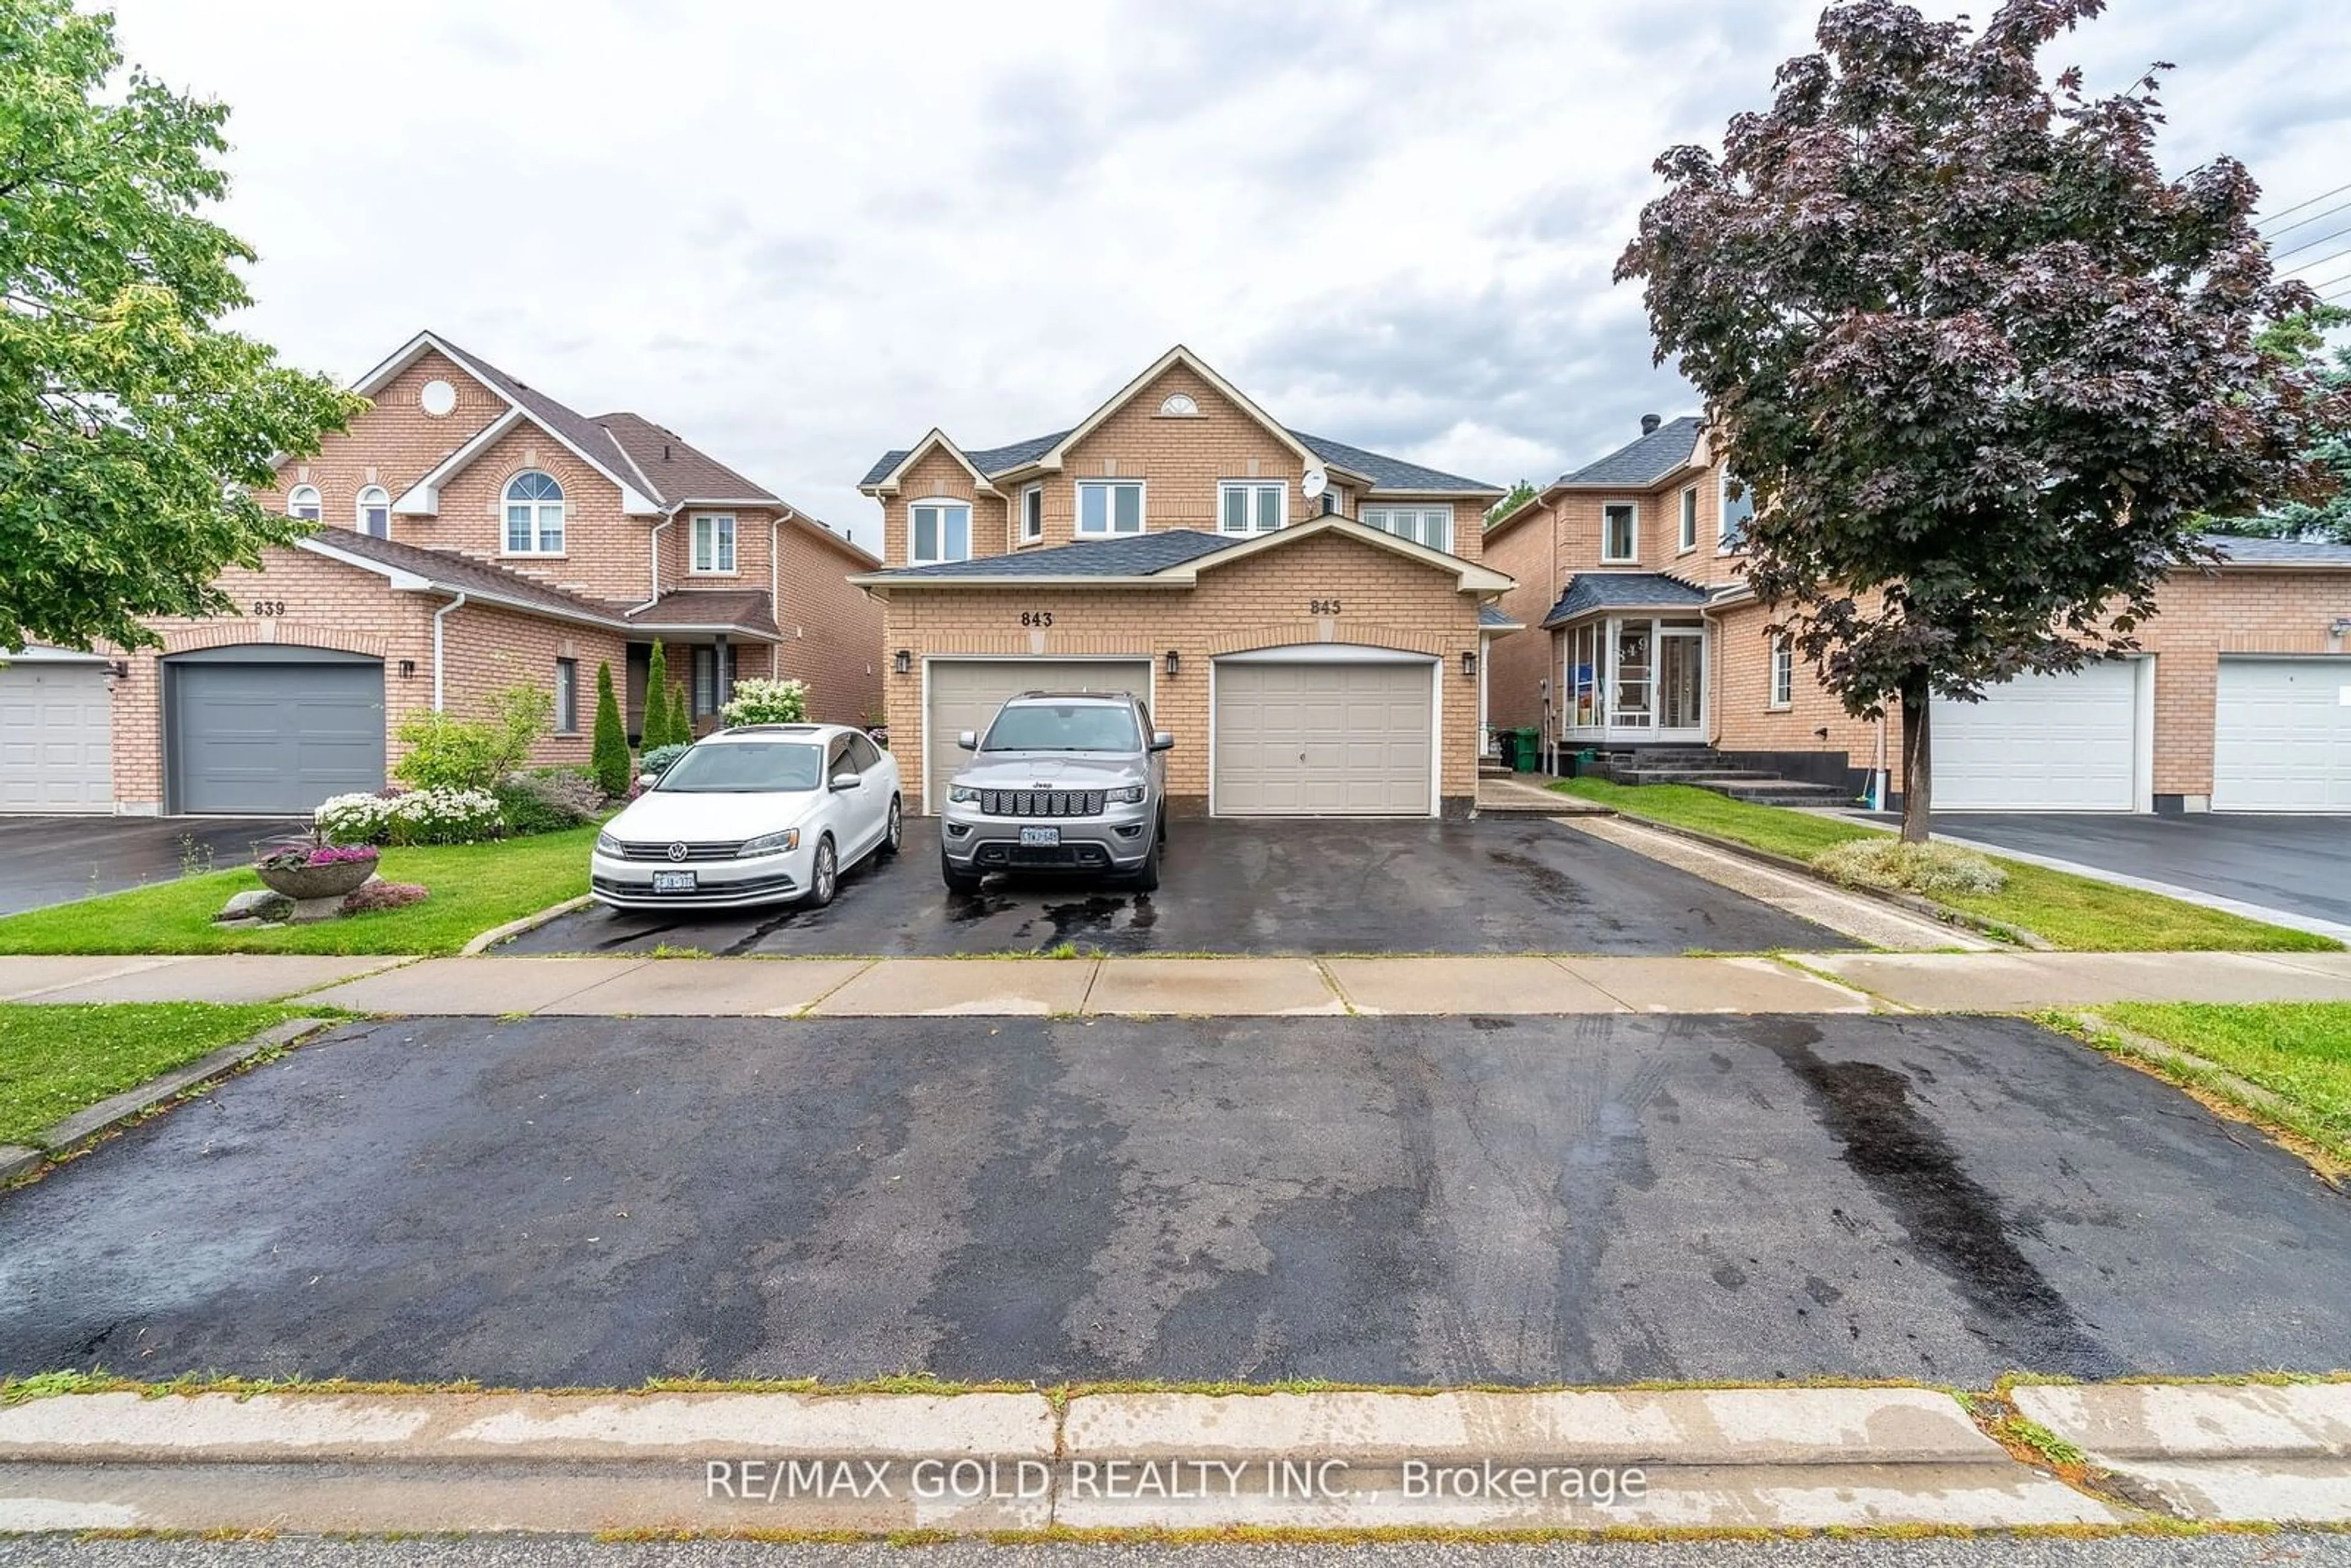 Frontside or backside of a home for 845 Applecroft Circ, Mississauga Ontario L5V 2A7